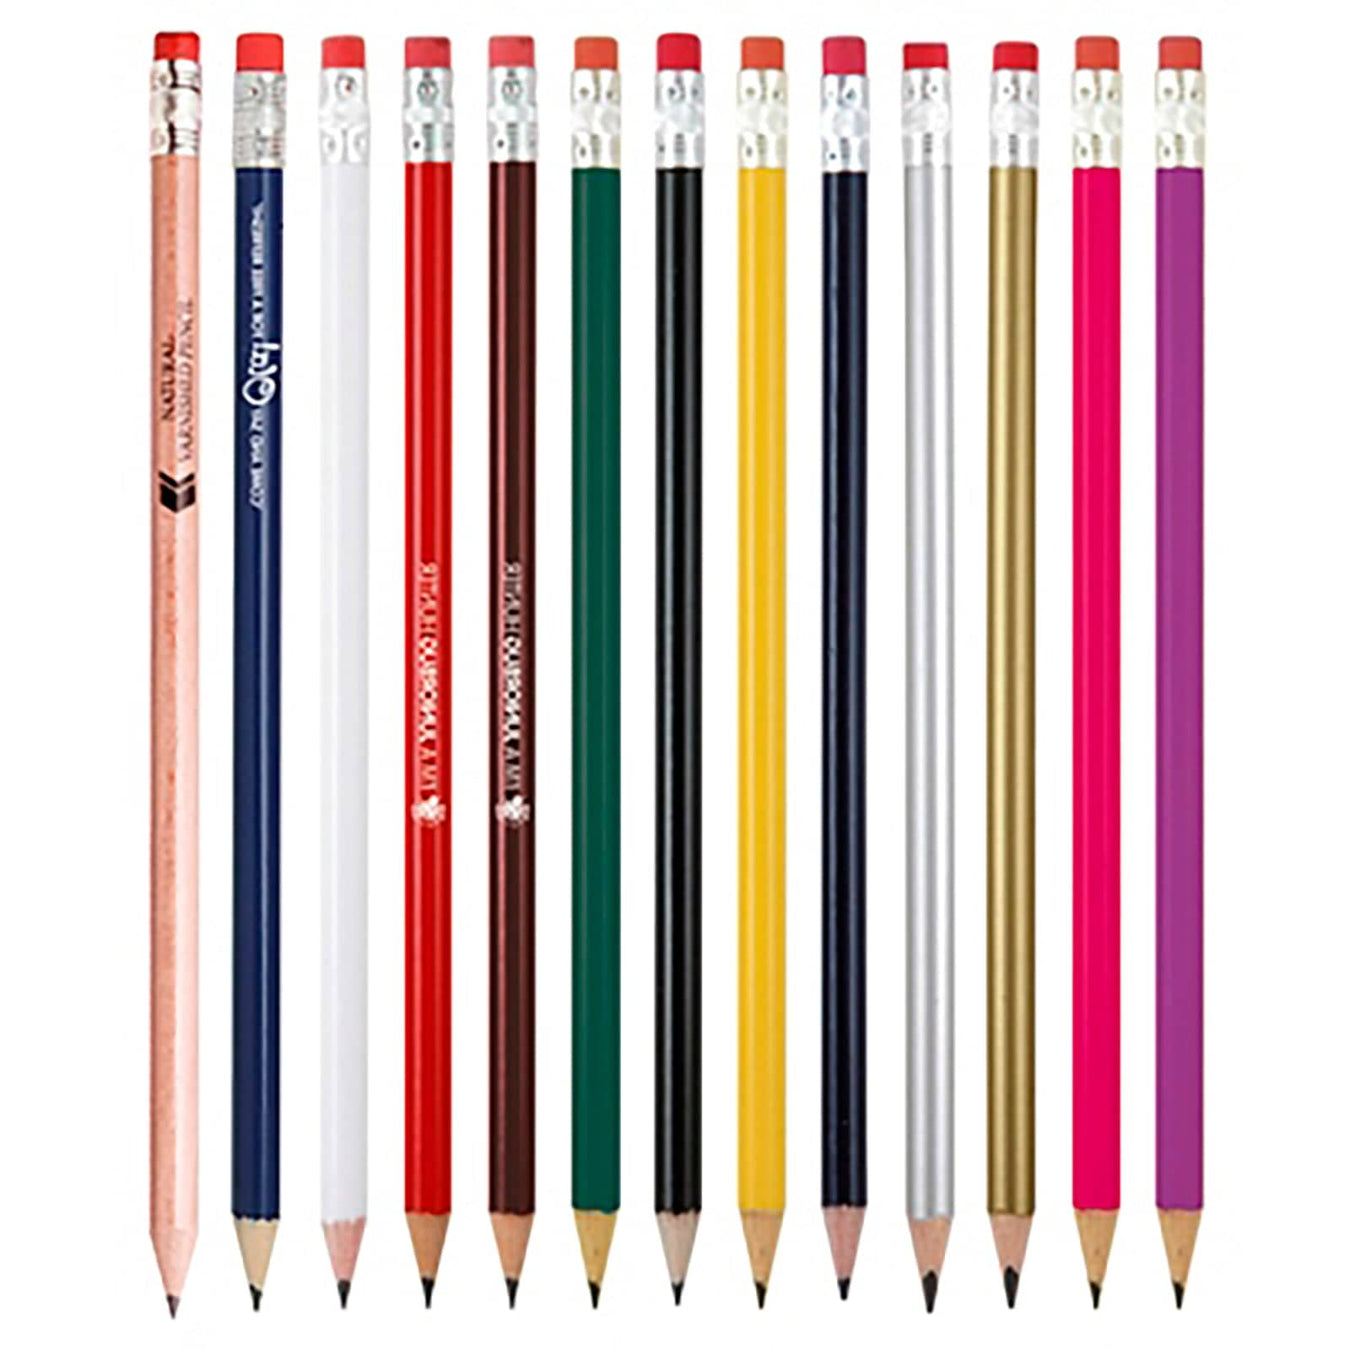 HB Rubber Tipped Pencil - All The Merchandise